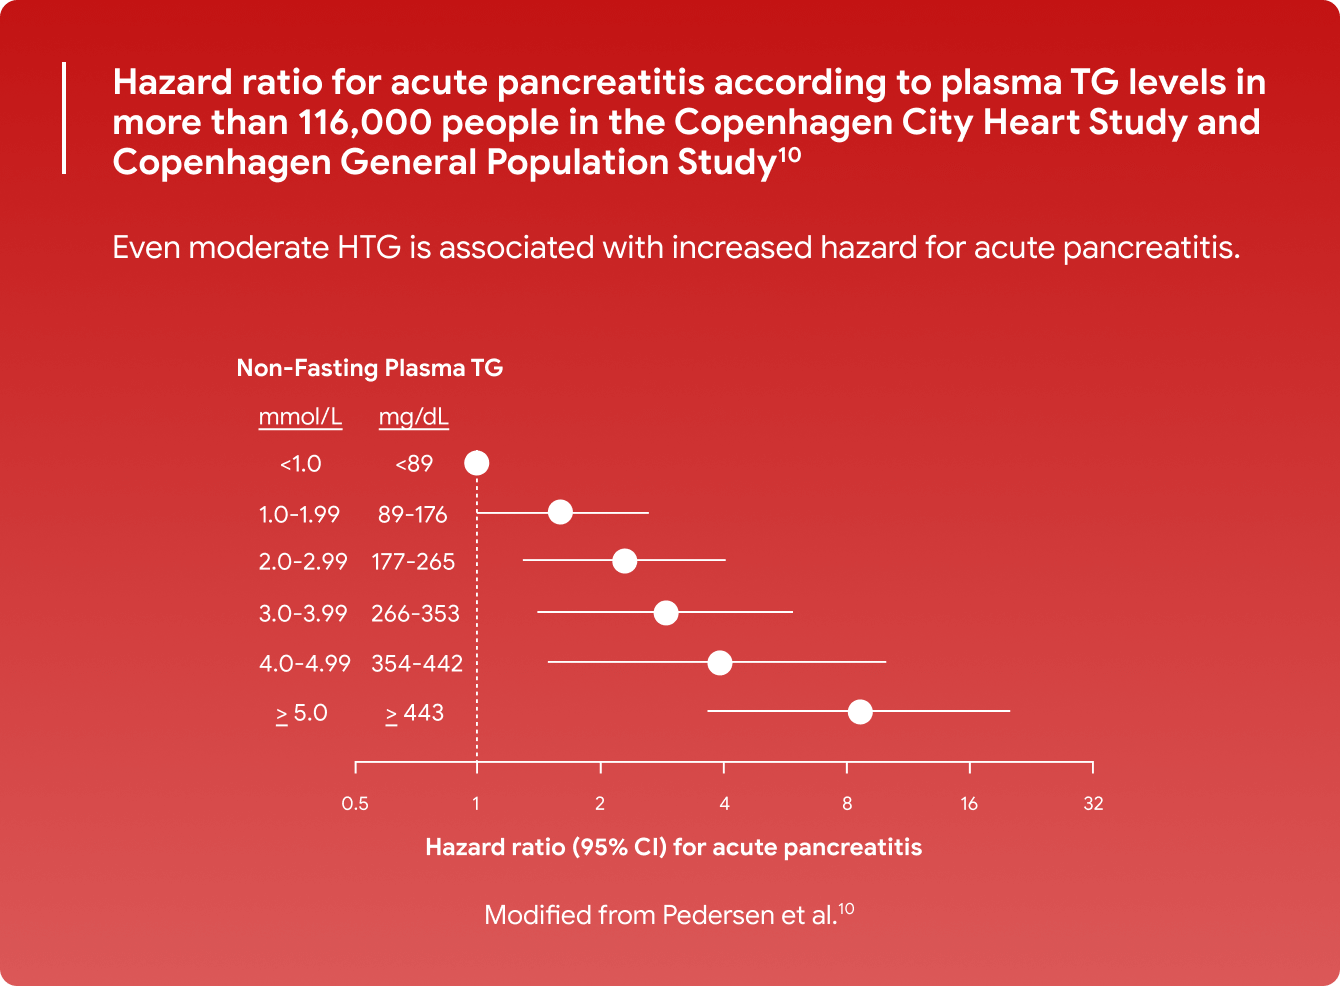 Even moderate HTG is associated with increased hazard for acute pancreatitis.